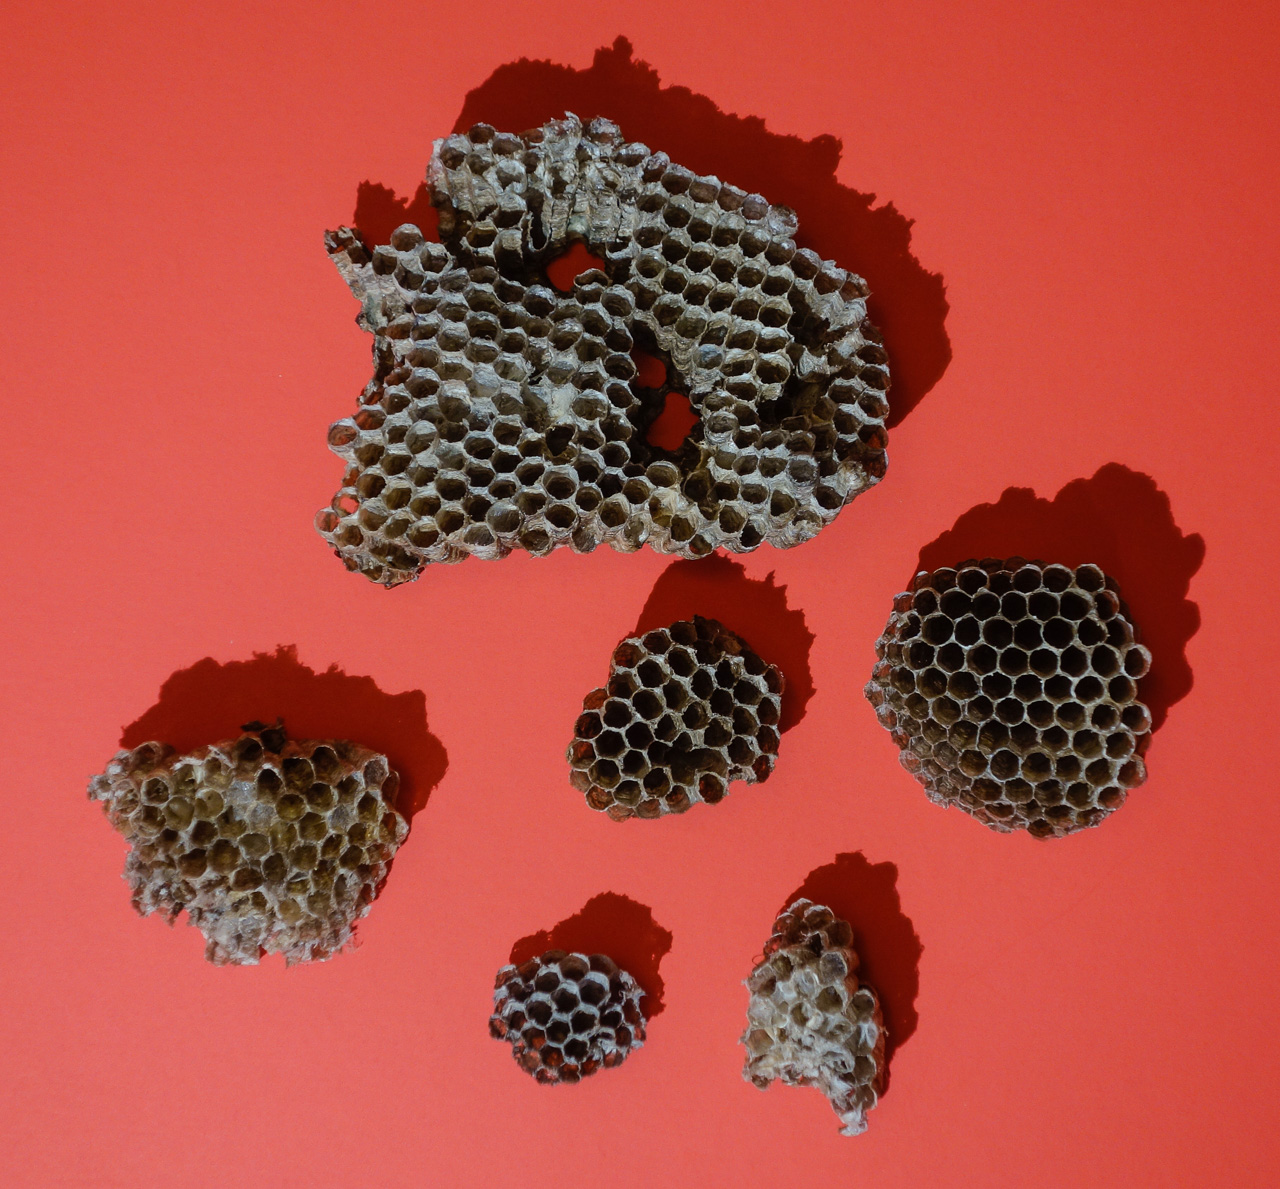 Paper wasp nests